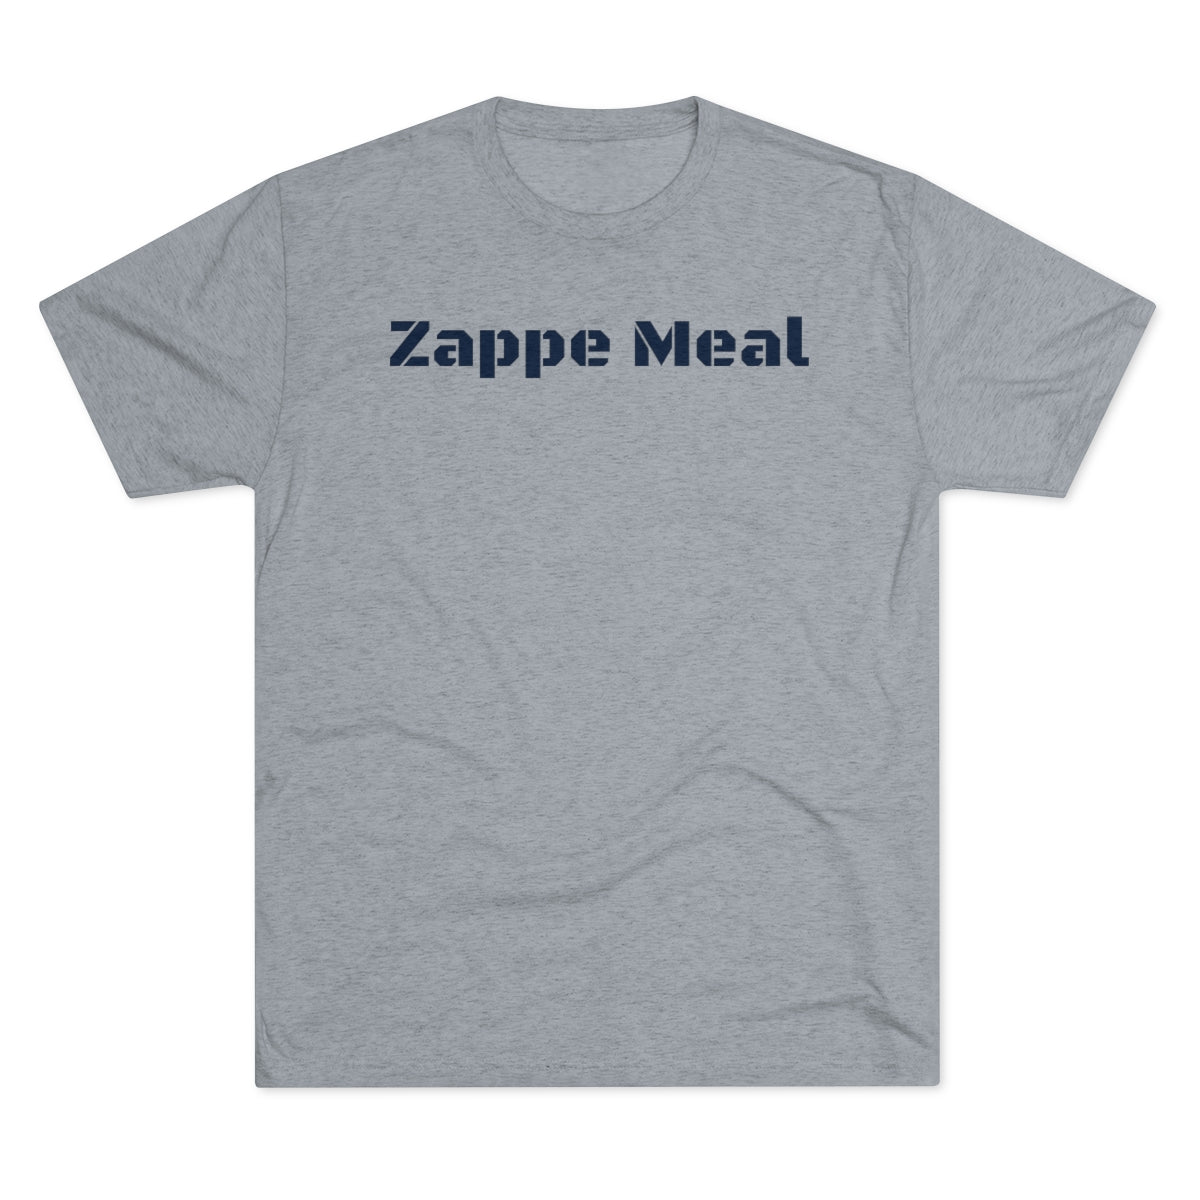 Zappe Meal Shirt - IsGoodBrand